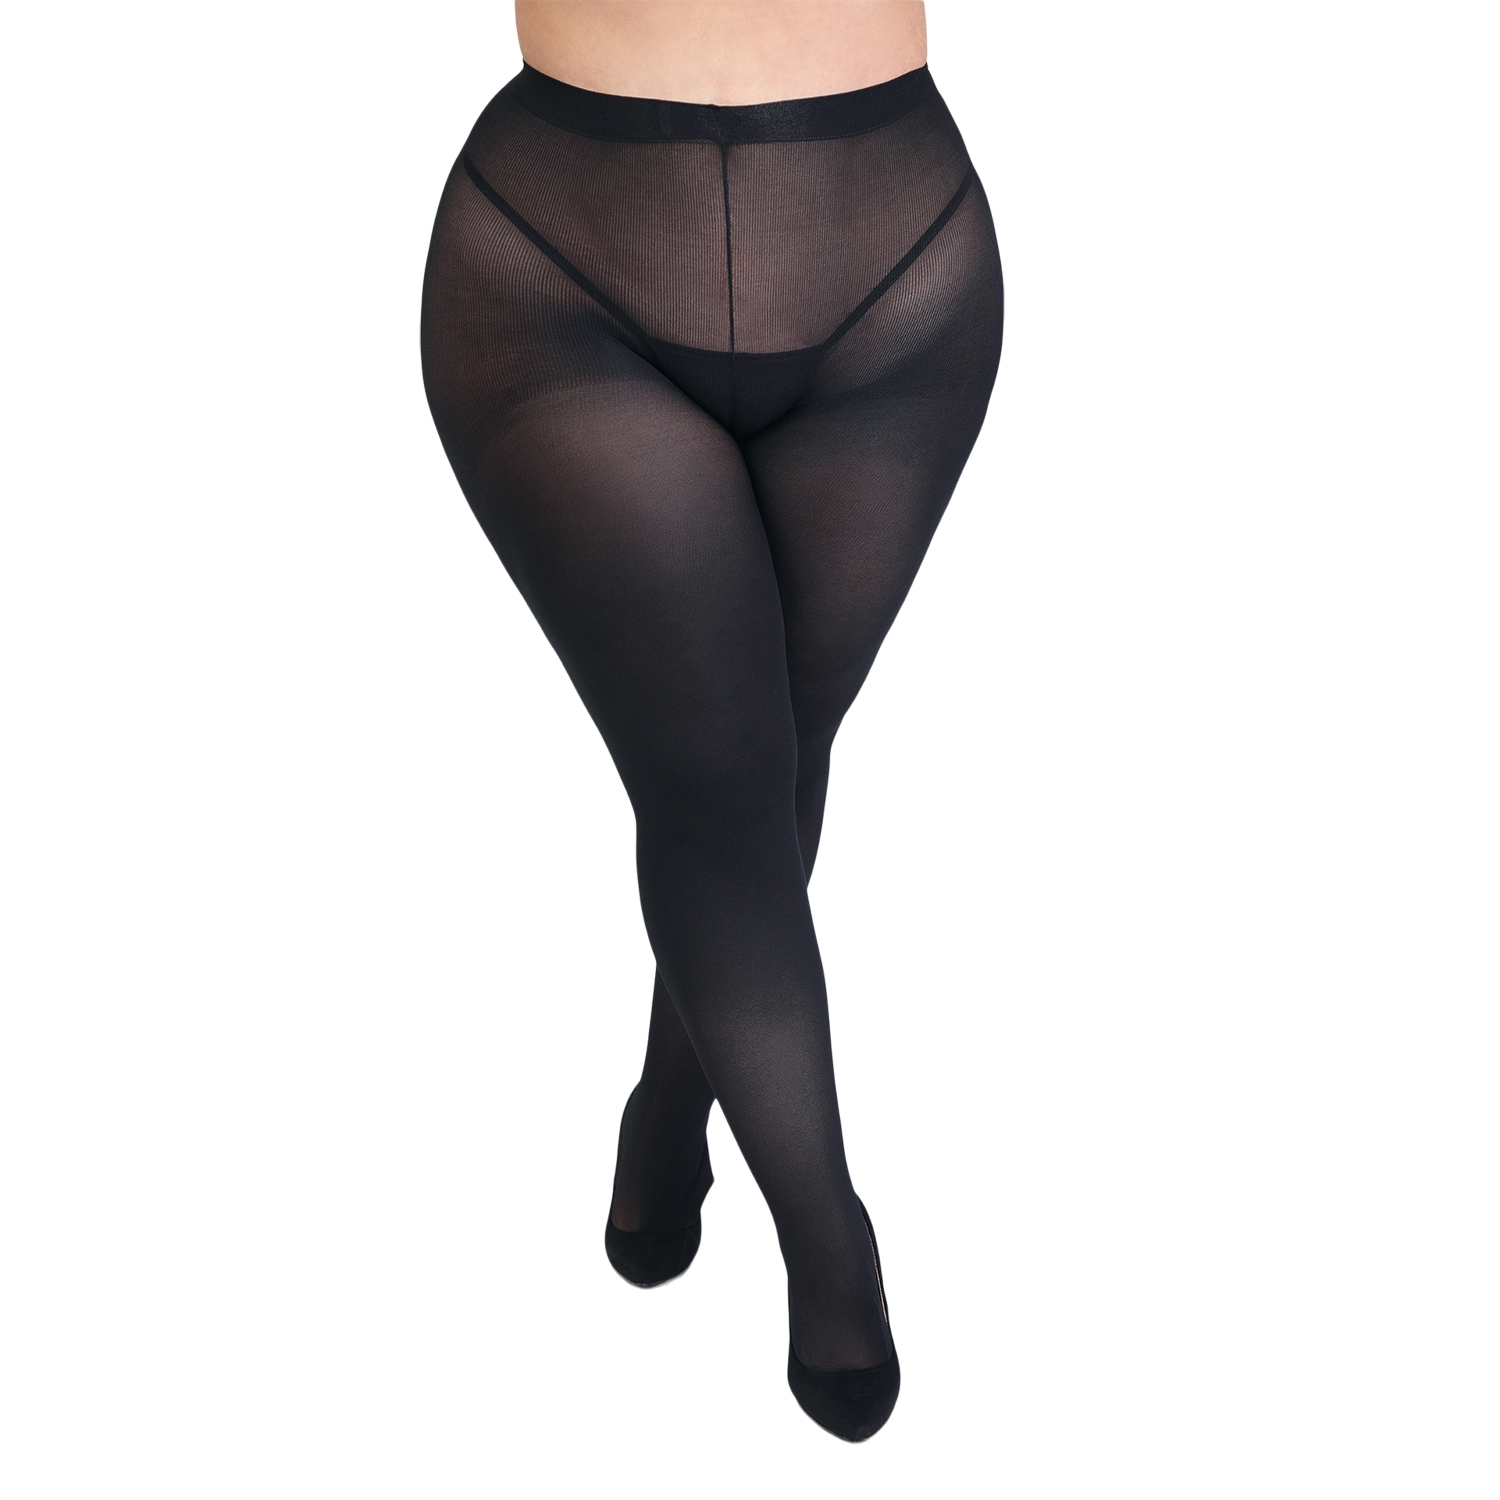 24201-fifty-shades-of-grey-captivate-spanking-tights-plus-size_01_model_q100-01